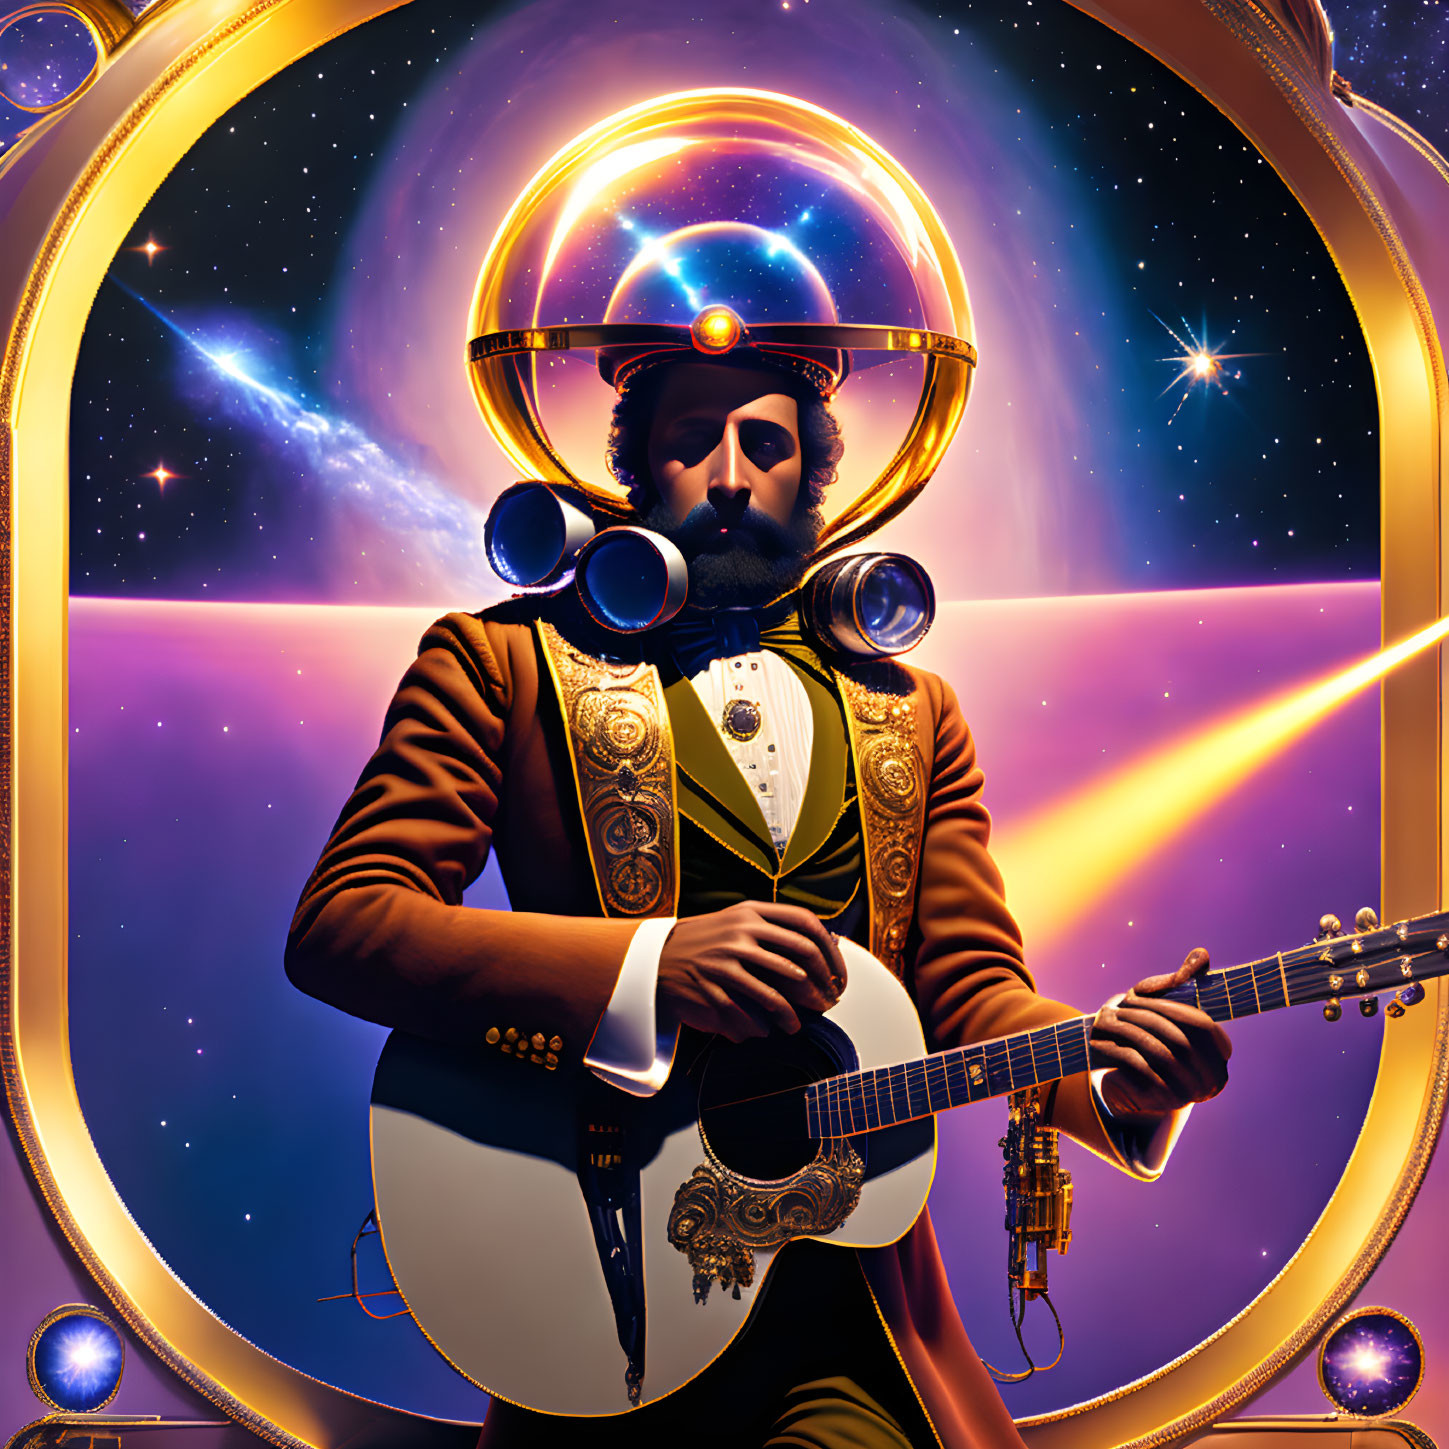 Illustration of man with beard playing guitar in astronaut helmet